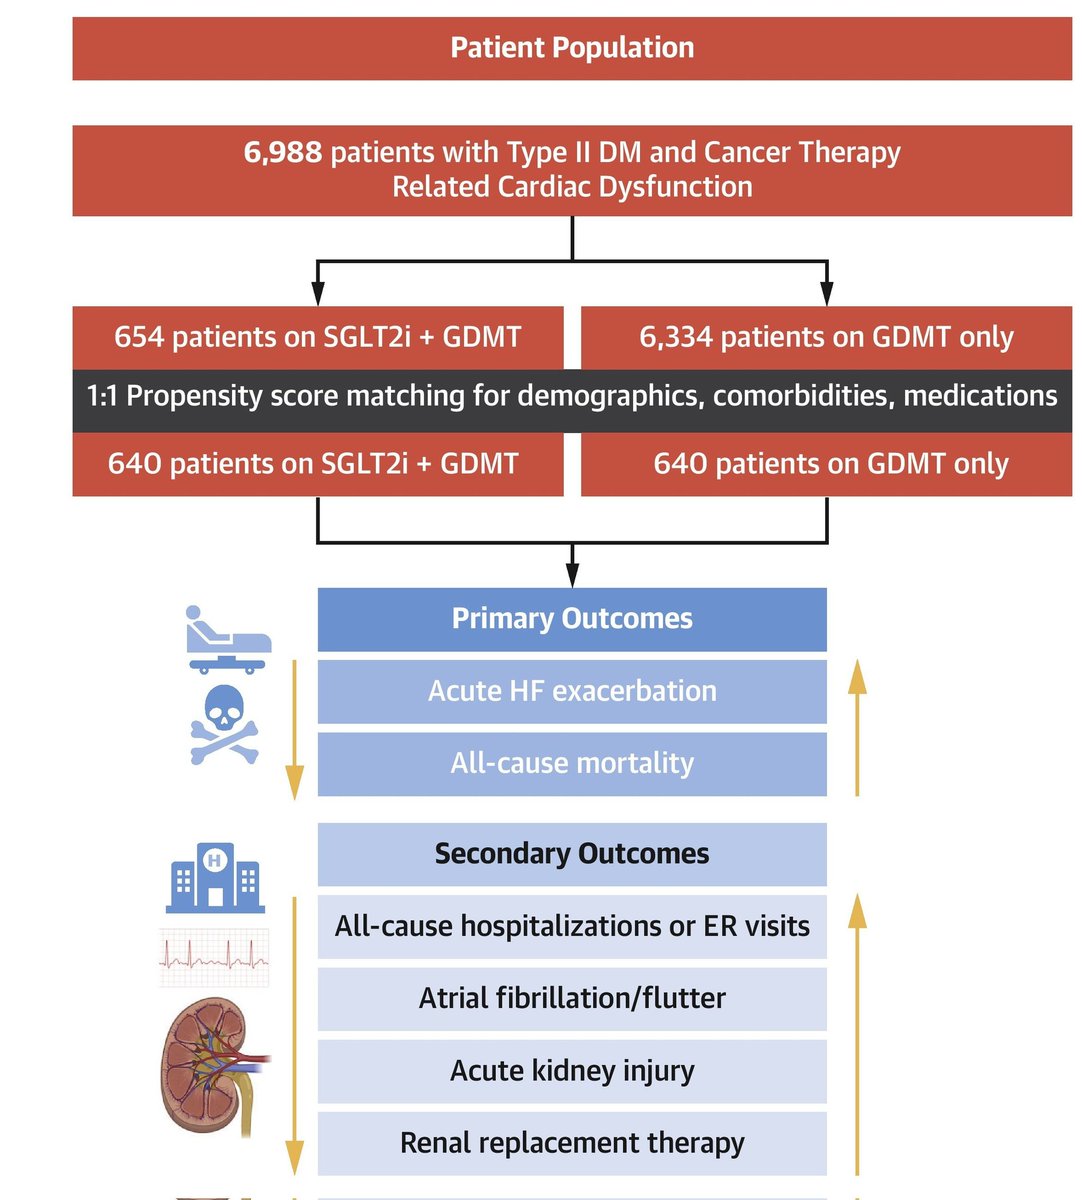 #SGLT2 inhibitor improved outcomes in #Cancer Therapy  #cardiotoxicity #CTRCD #cardioonc #cardiometabolic 

#SGLT2i shows incremental benefits in addition to other #GDMT 

🔻 #HeartFailure, mortality, hospitalization, #Afib #AKI 

@JACCJournals
@ACCinTouch @LaheyResearch